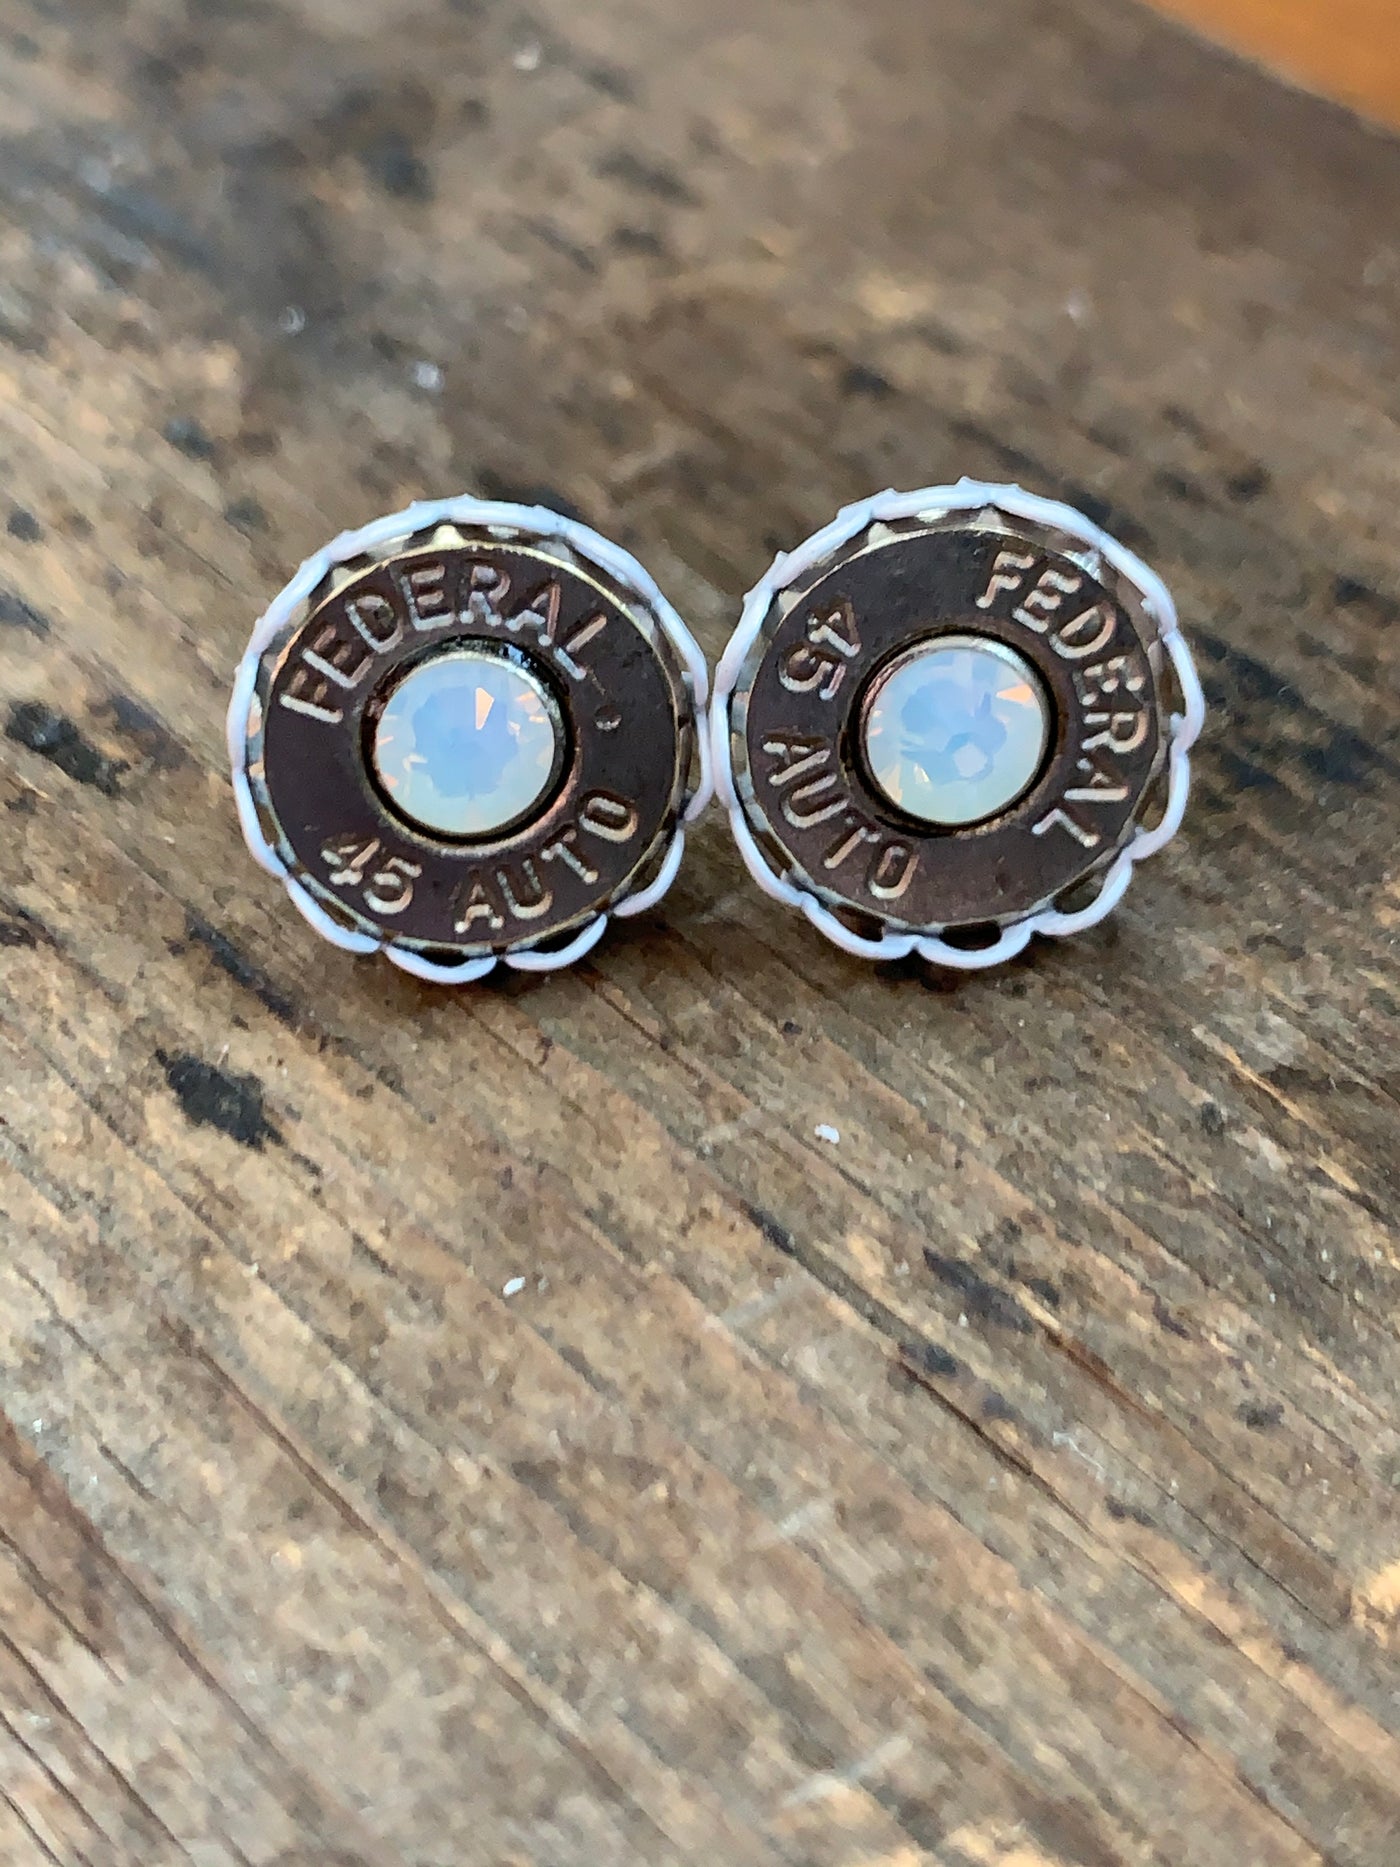 45 Auto Bullet Earrings with White Setting and Opal Crystal - Jill's Jewels | Unique, Handcrafted, Trendy, And Fun Jewelry